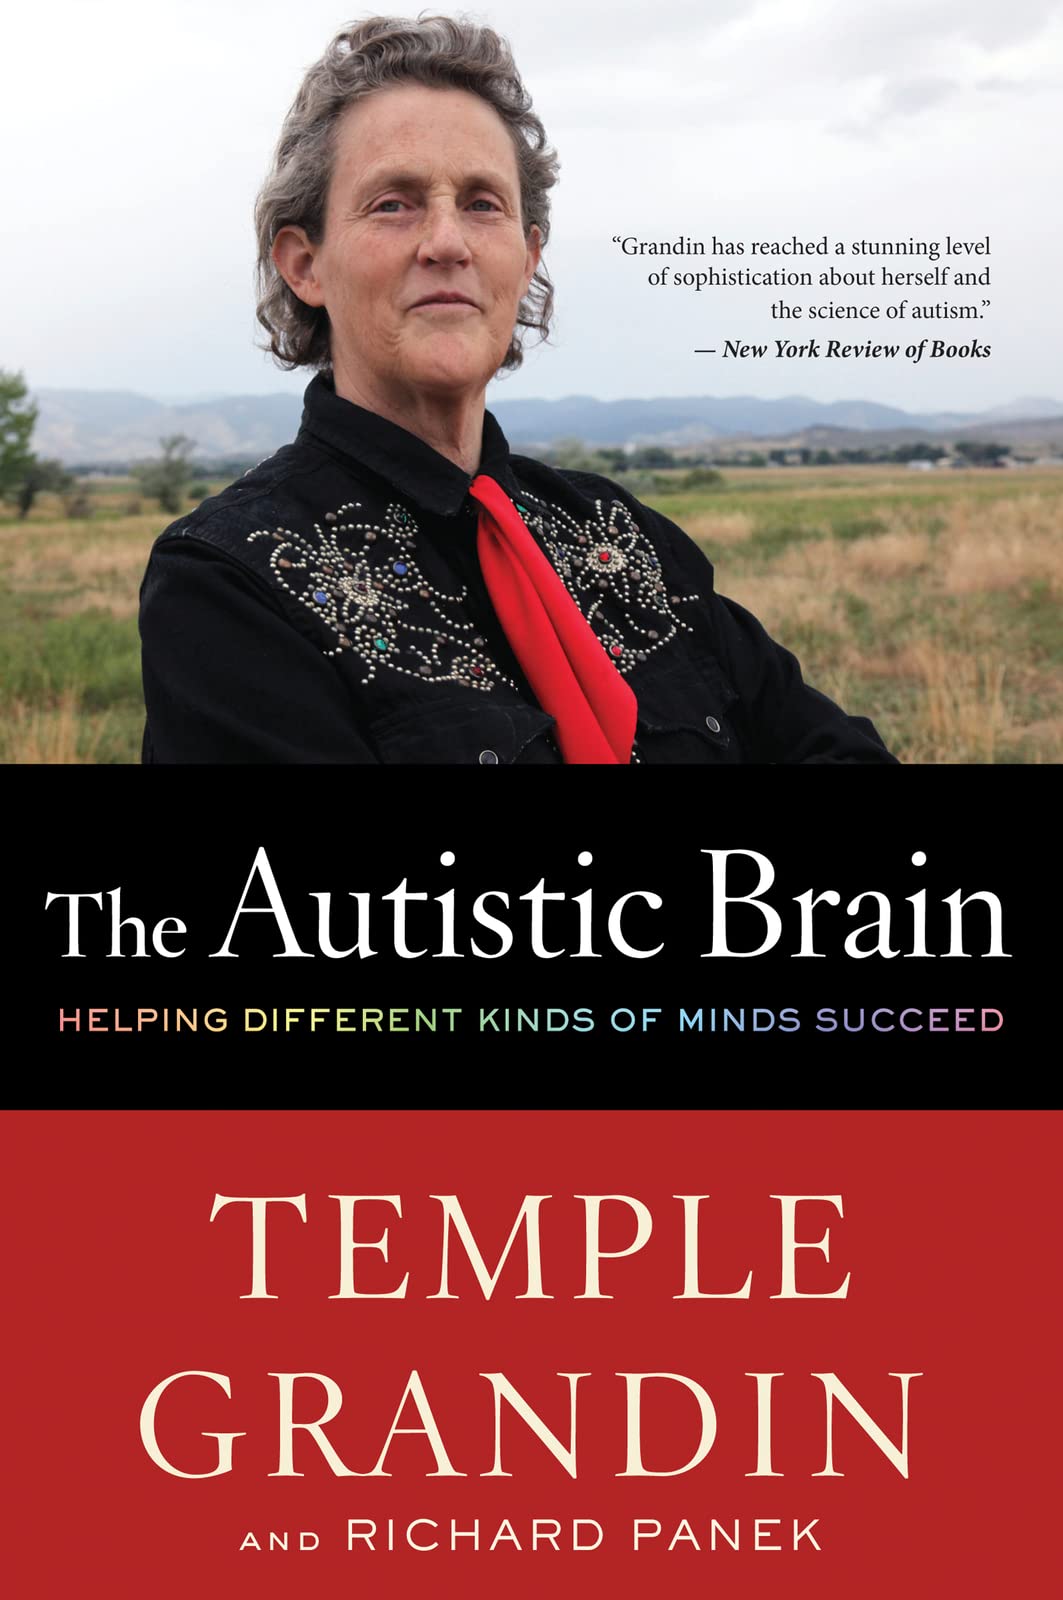 Grandin - The Autistic Brain: Helping Different Kinds of Minds Succeed